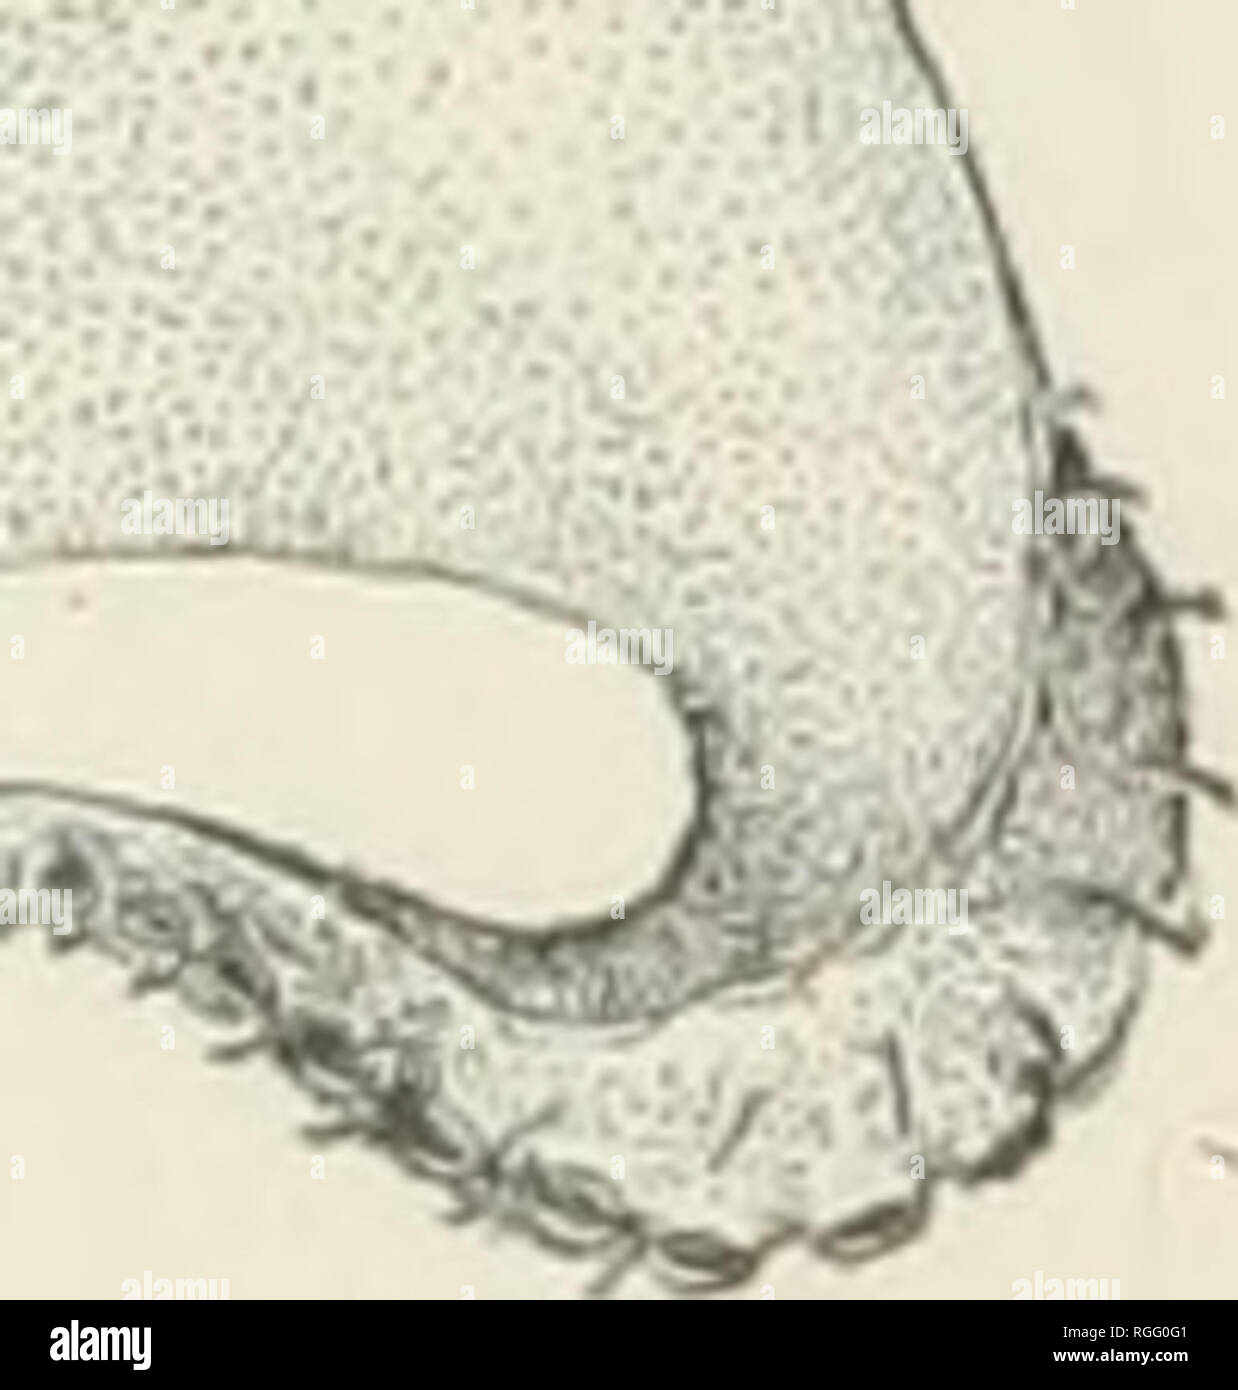 . Bulletin of the Museum of Comparative Zoology at Harvard College. Zoology; Zoology. Fig. 274. — Opisthoteuthis Agassizii. Abt. |. (Verrill.) which they have been obtained. Many of them are pelagic, and serve as food for a large number of marine animals.1 Professor Verrill, who has examined the cephalopods collected by the &quot; Blake,&quot; mentions as specially noteworthy the follow- ing: Opisthoteuthis Agassizii (Fig. 274), a species with a broad body of a dark chocolate color, long fins, and arms united 1 Very common in the Gulf Stream is surface. It is known as the &quot; flying the Sth Stock Photo